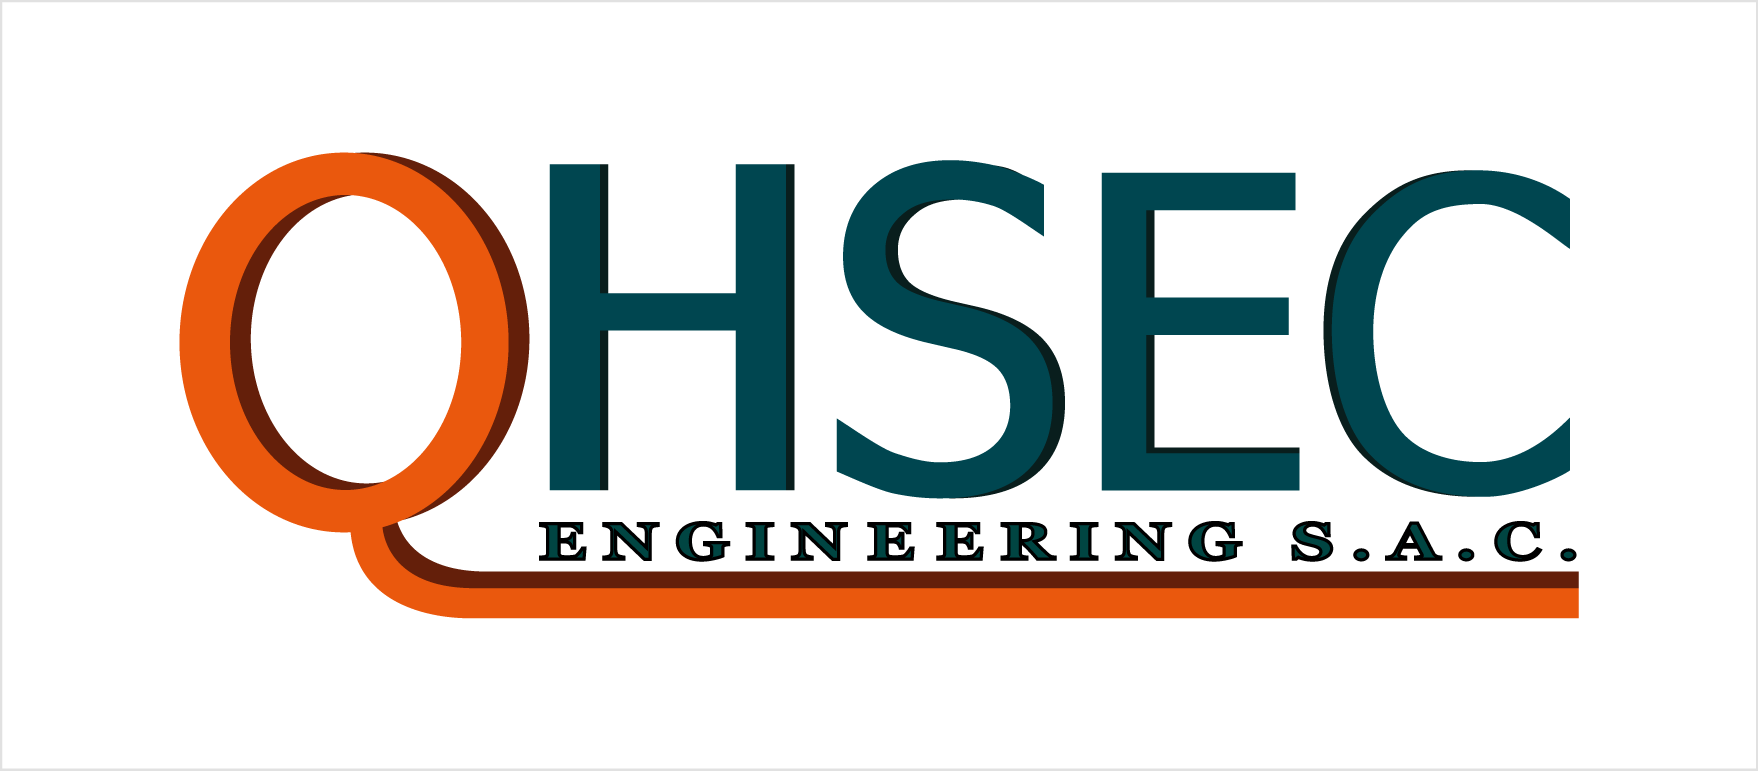 QUALITY HEALTH SAFETY ENVIROMENT AND ENGINEERING CONSULTING S.A.C. -QHSEC